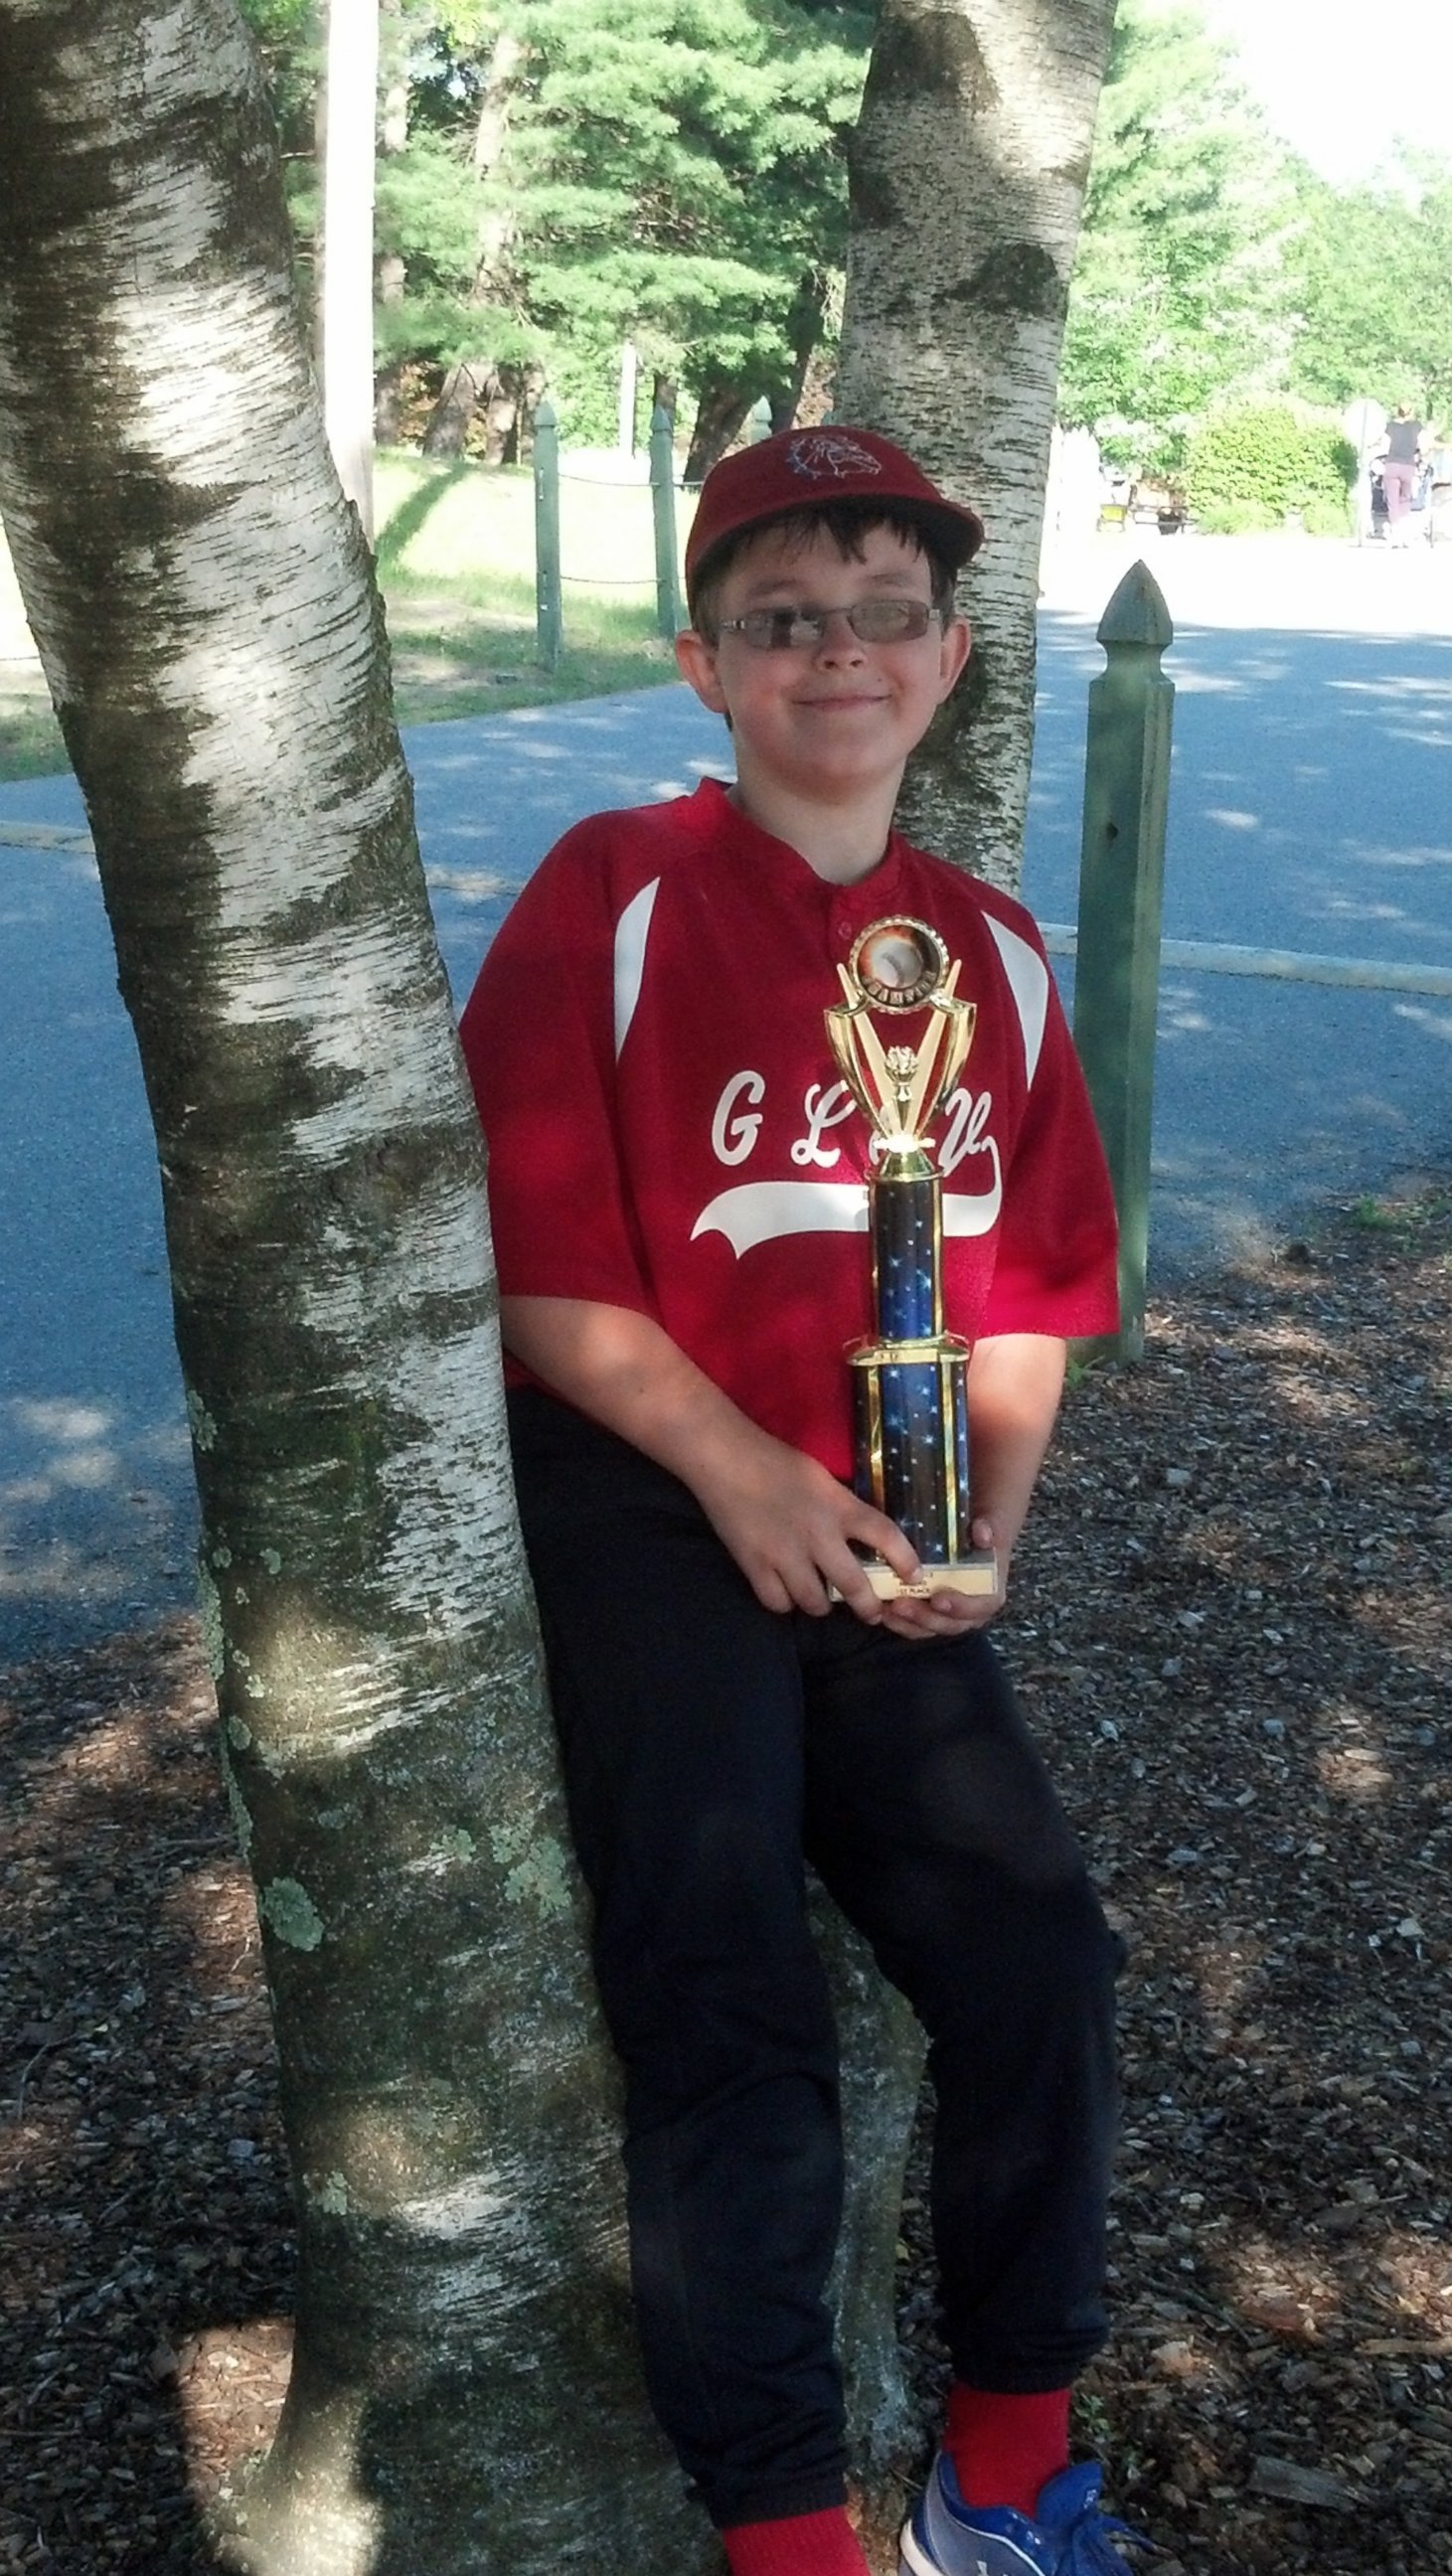 This photo provided by Richard Taras shows Jacobe Taras with a baseball championship trophy in 2014, a year before he committed suicide over school bullying in Moreau, N.Y.